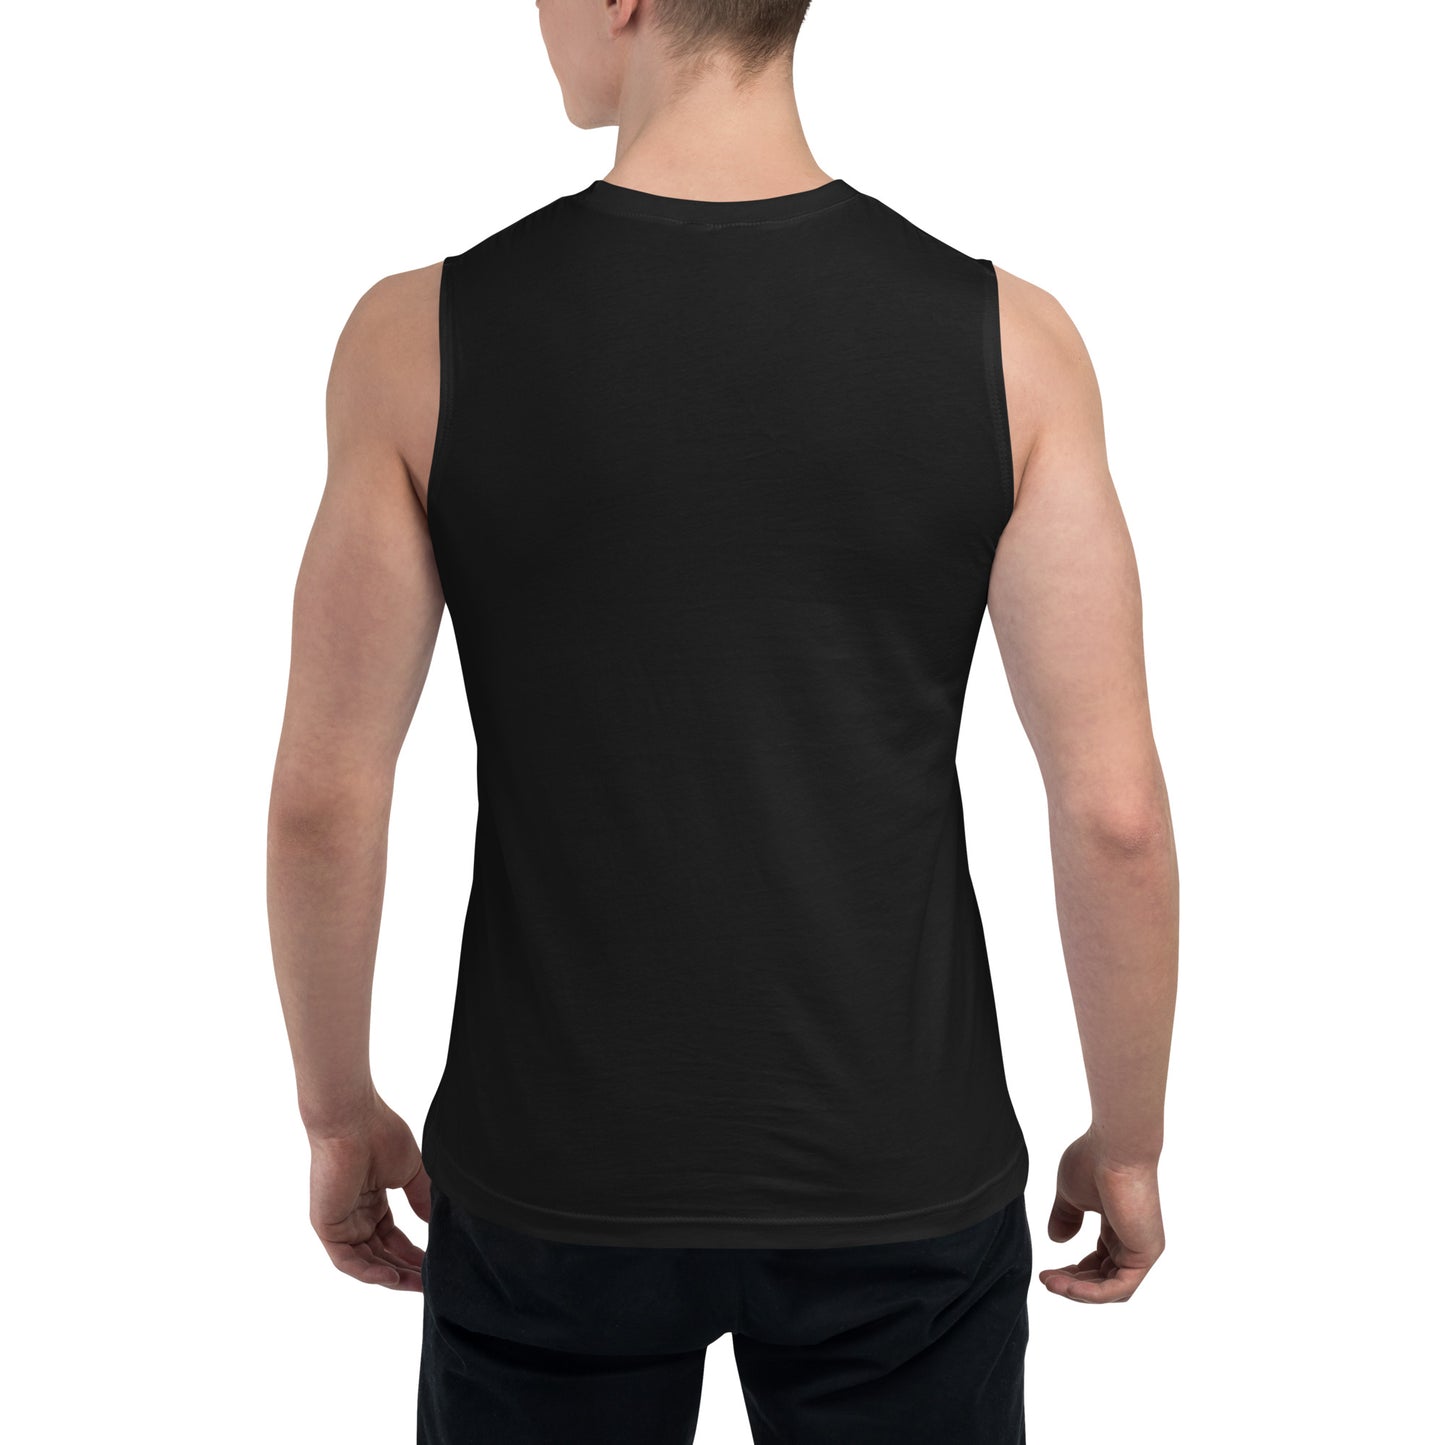 CENTER YOURSELF Muscle Shirt